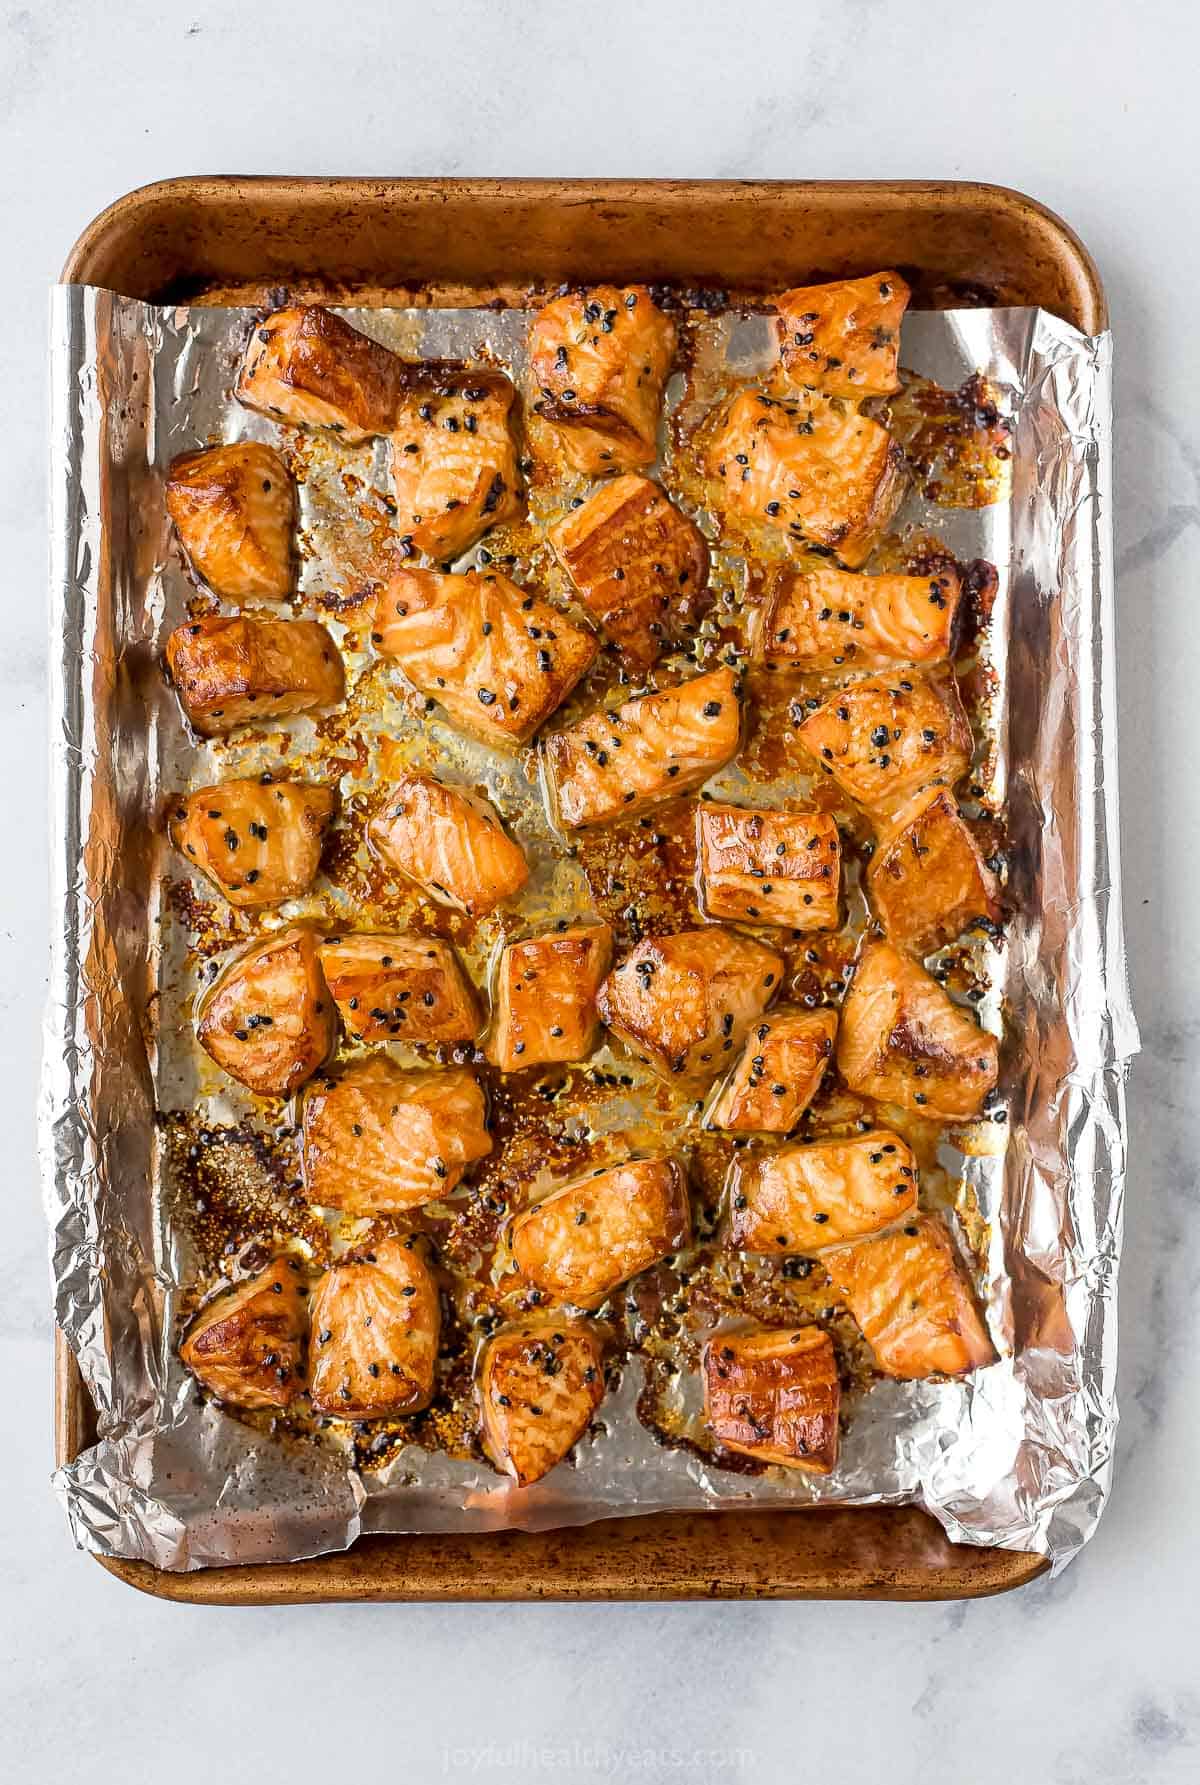 Marinated and baked cubes of salmon on a foil-lined baking sheet